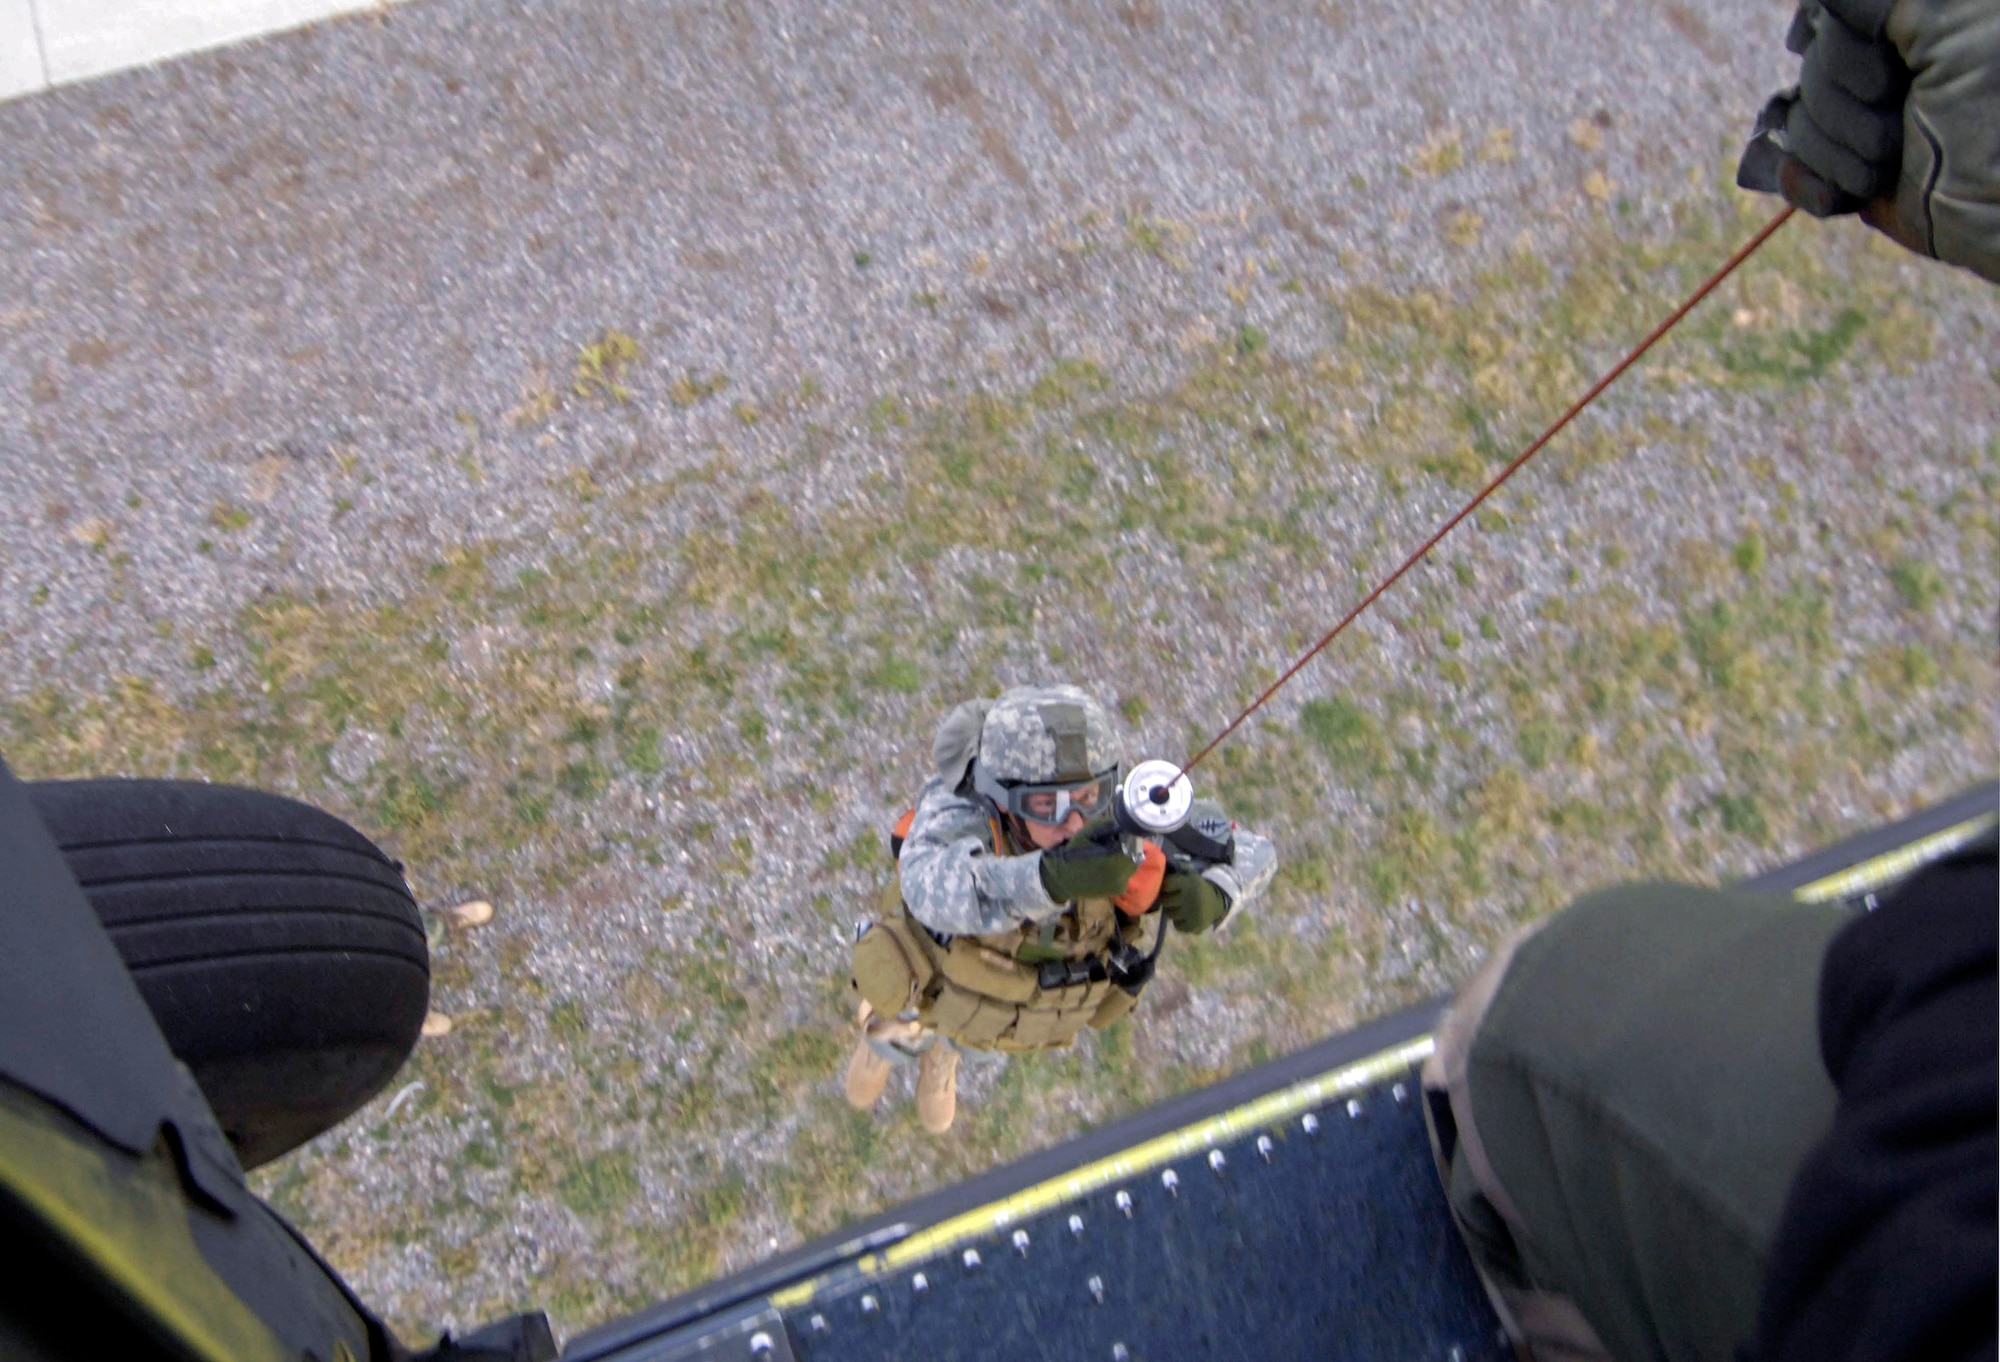 A Utah National Guard Soldier is hoisted on board an HH-60 Pave Hawk during a combat search and rescue integration exercise Nov. 9 at Camp Williams, Utah.  Members of the 34th Weapons Squadron from Nellis AFB led the search and recovery training. The exercise expanded the integration with Utah's 211th Aviation Group AH-64 Apache Joint Rotary Wing, 4th Fighter Squadron F-16 Fighting Falcon assets from Hill AFB, Utah, and special operations forces. Exercise participants also conducted extensive joint combat search and rescue operations against surface-to-air threats. The exercise is being run held Nov. 6 through 15. (U.S. Air Force photo/Master Sgt. Kevin J. Gruenwald) 
